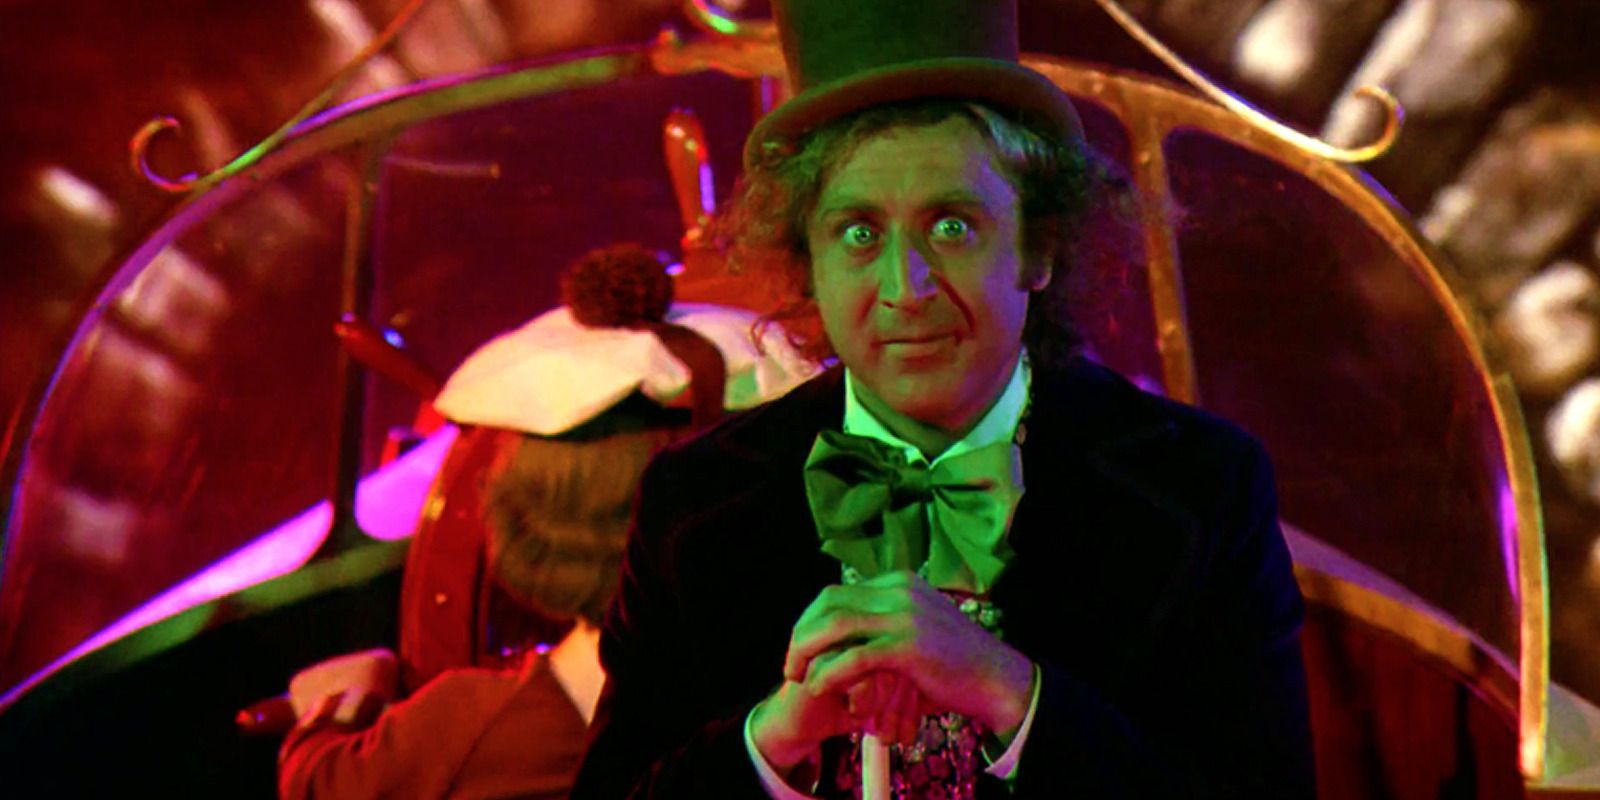 Gene Wilder in 'Willy Wonka and the Chocolate Factory' going through a colorful tunnel